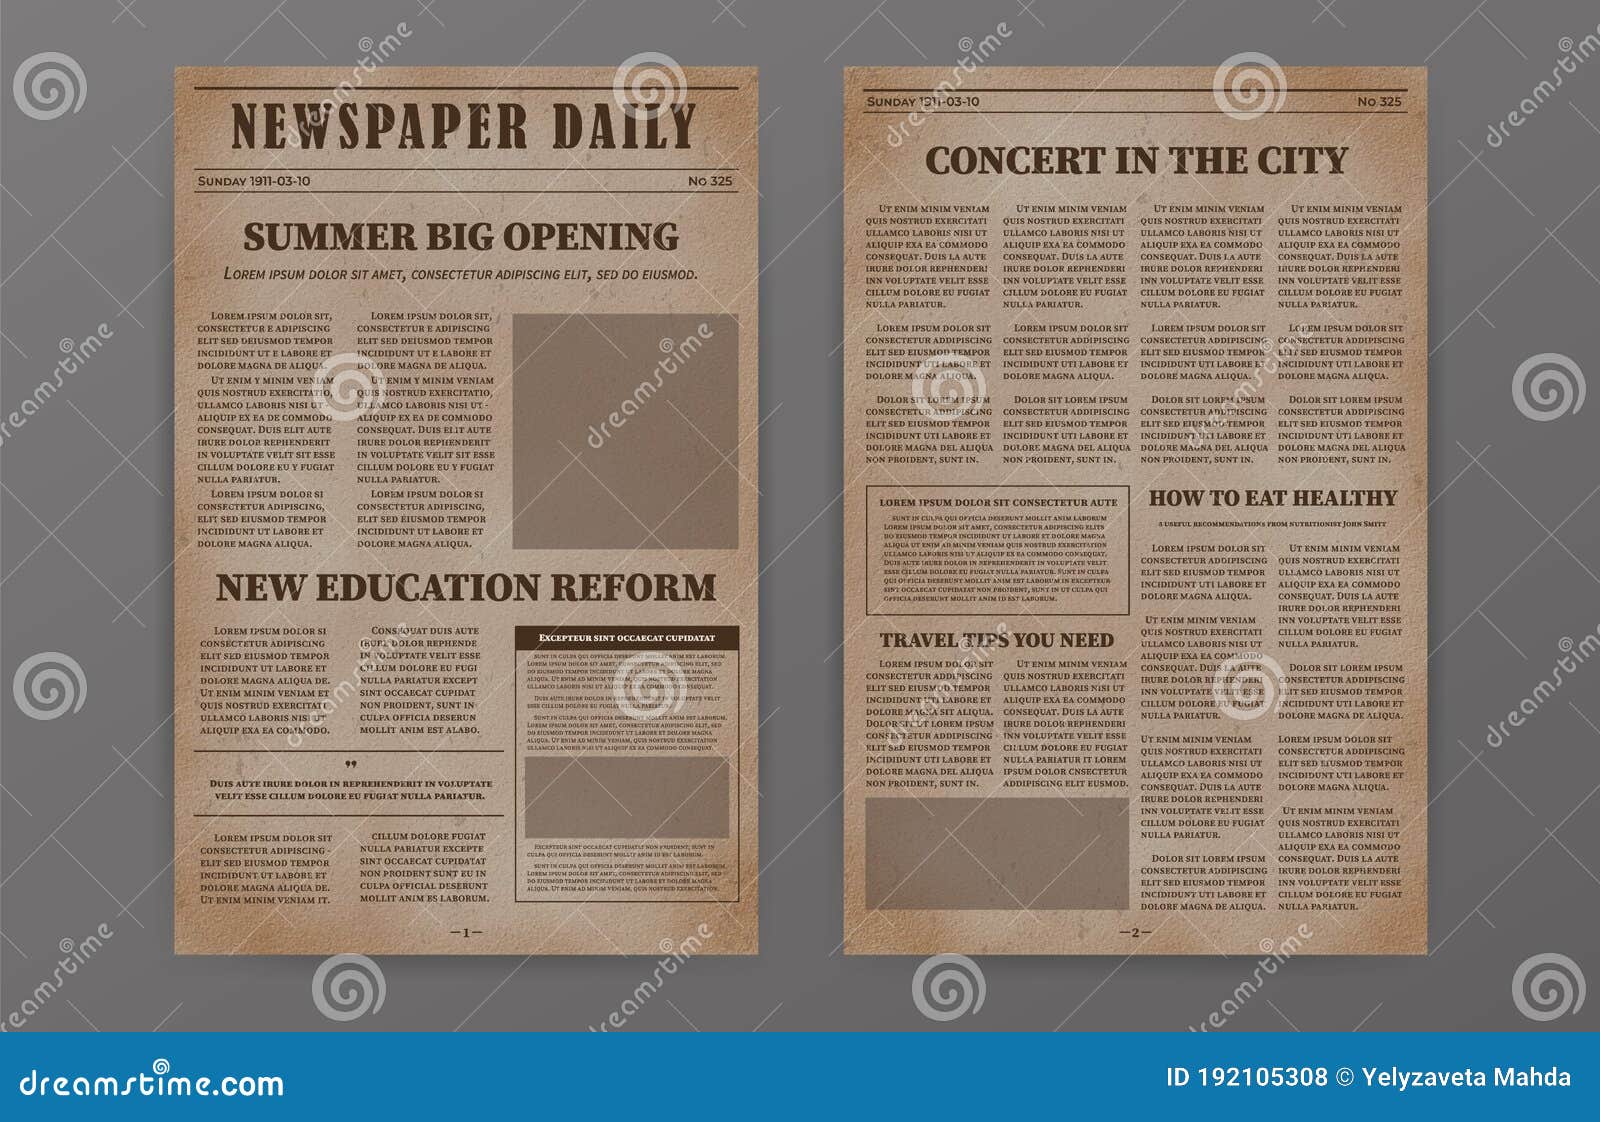 Old Paper Newspaper Template Vintage News Articles Old Design Newsprint Magazine Set Brochure Newspaper Pages With Headline Stock Vector Illustration Of Graphics Article